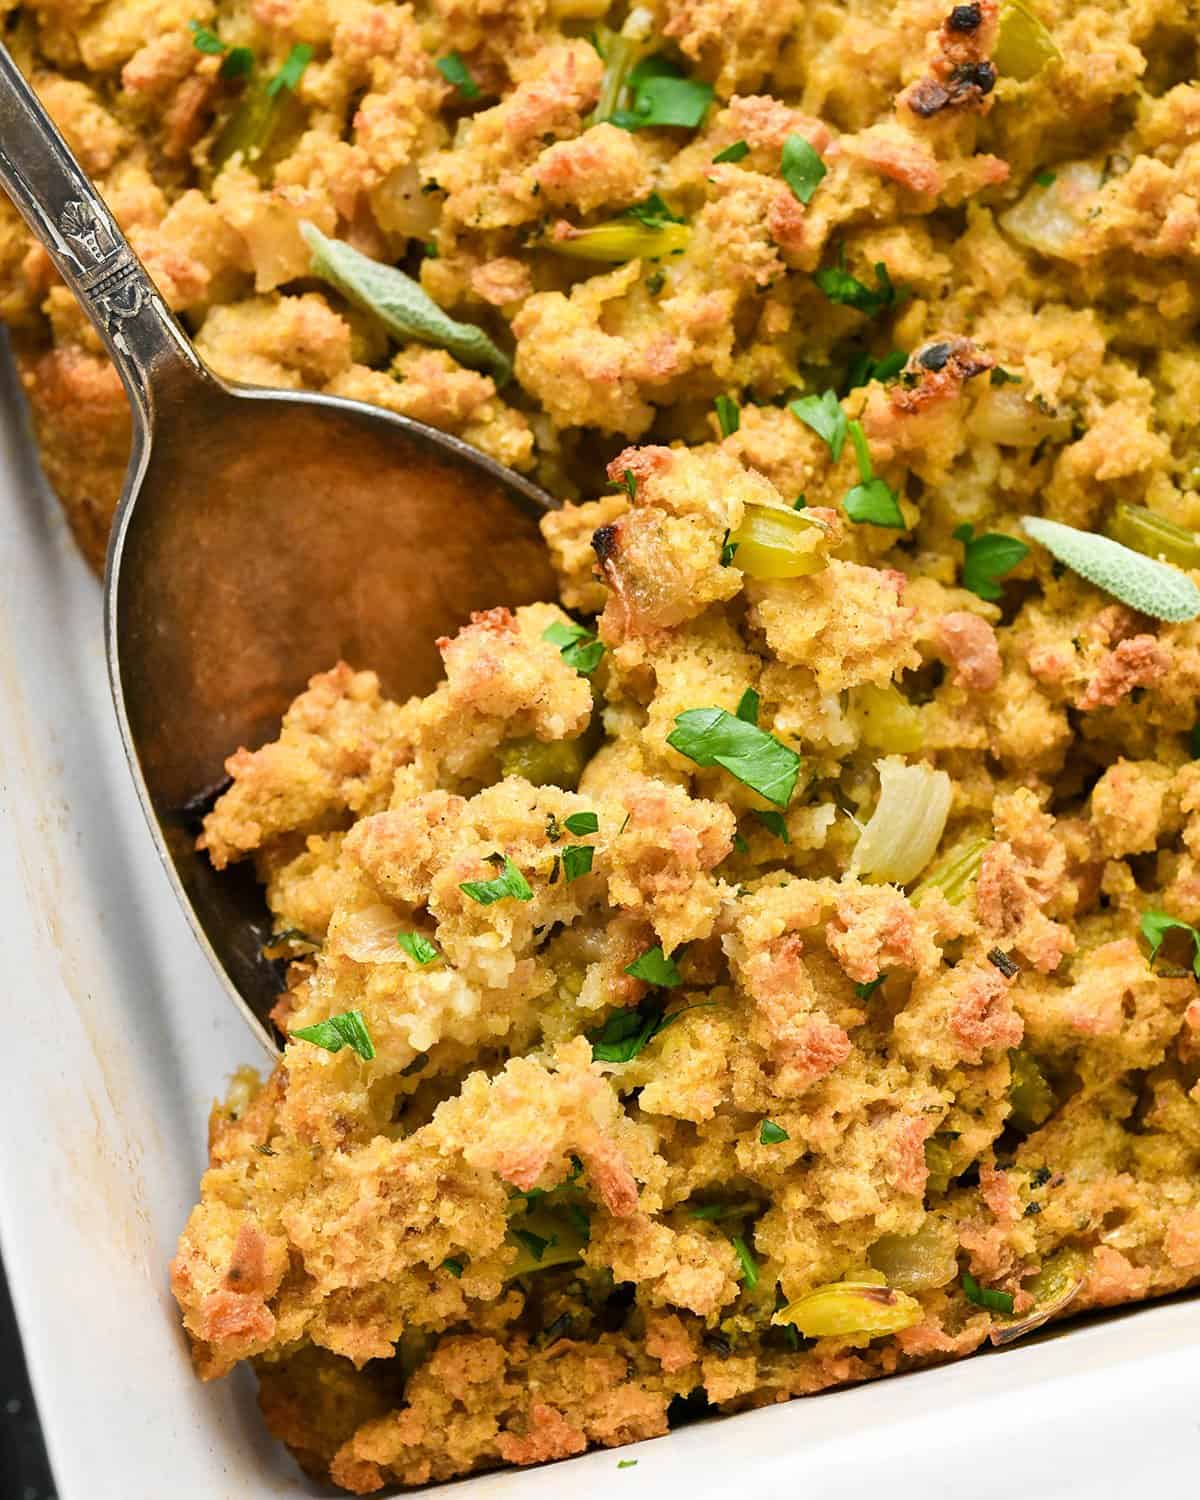 up close photo of a spoon taking a scoop of Cornbread stuffing out of a baking dish 